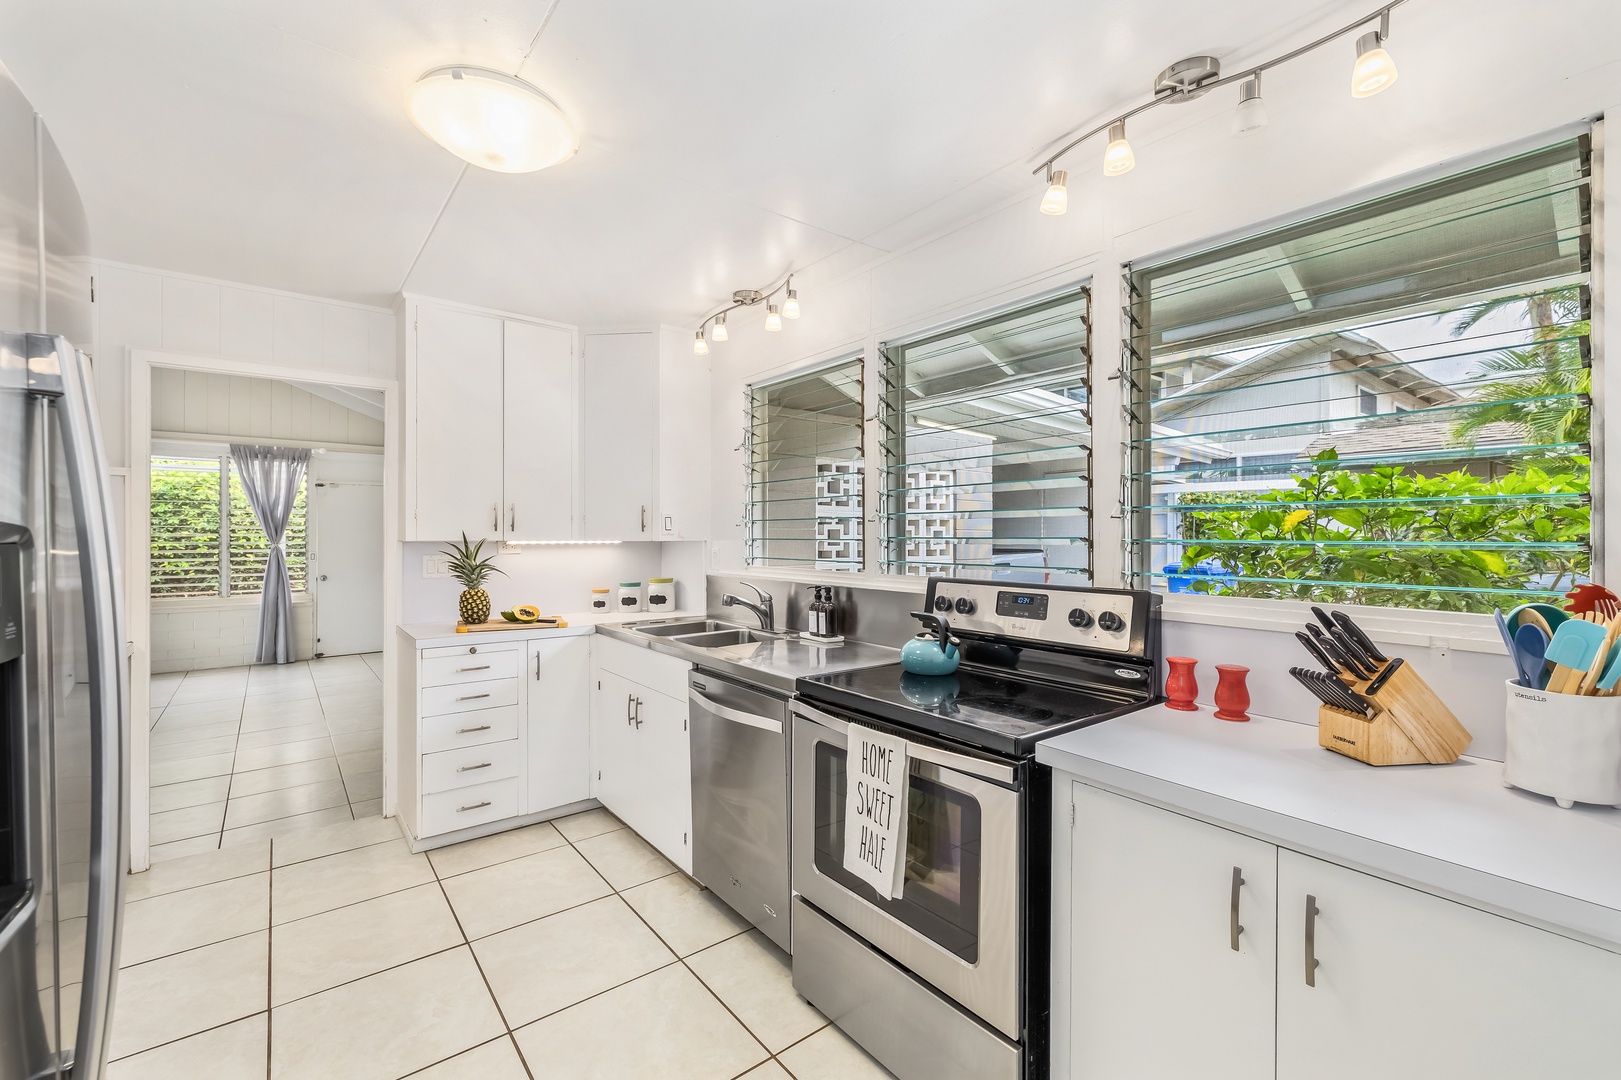 Honolulu Vacation Rentals, Kahala Cottage - The kitchen has stainless steel appliances to make meal preppin a breeze.